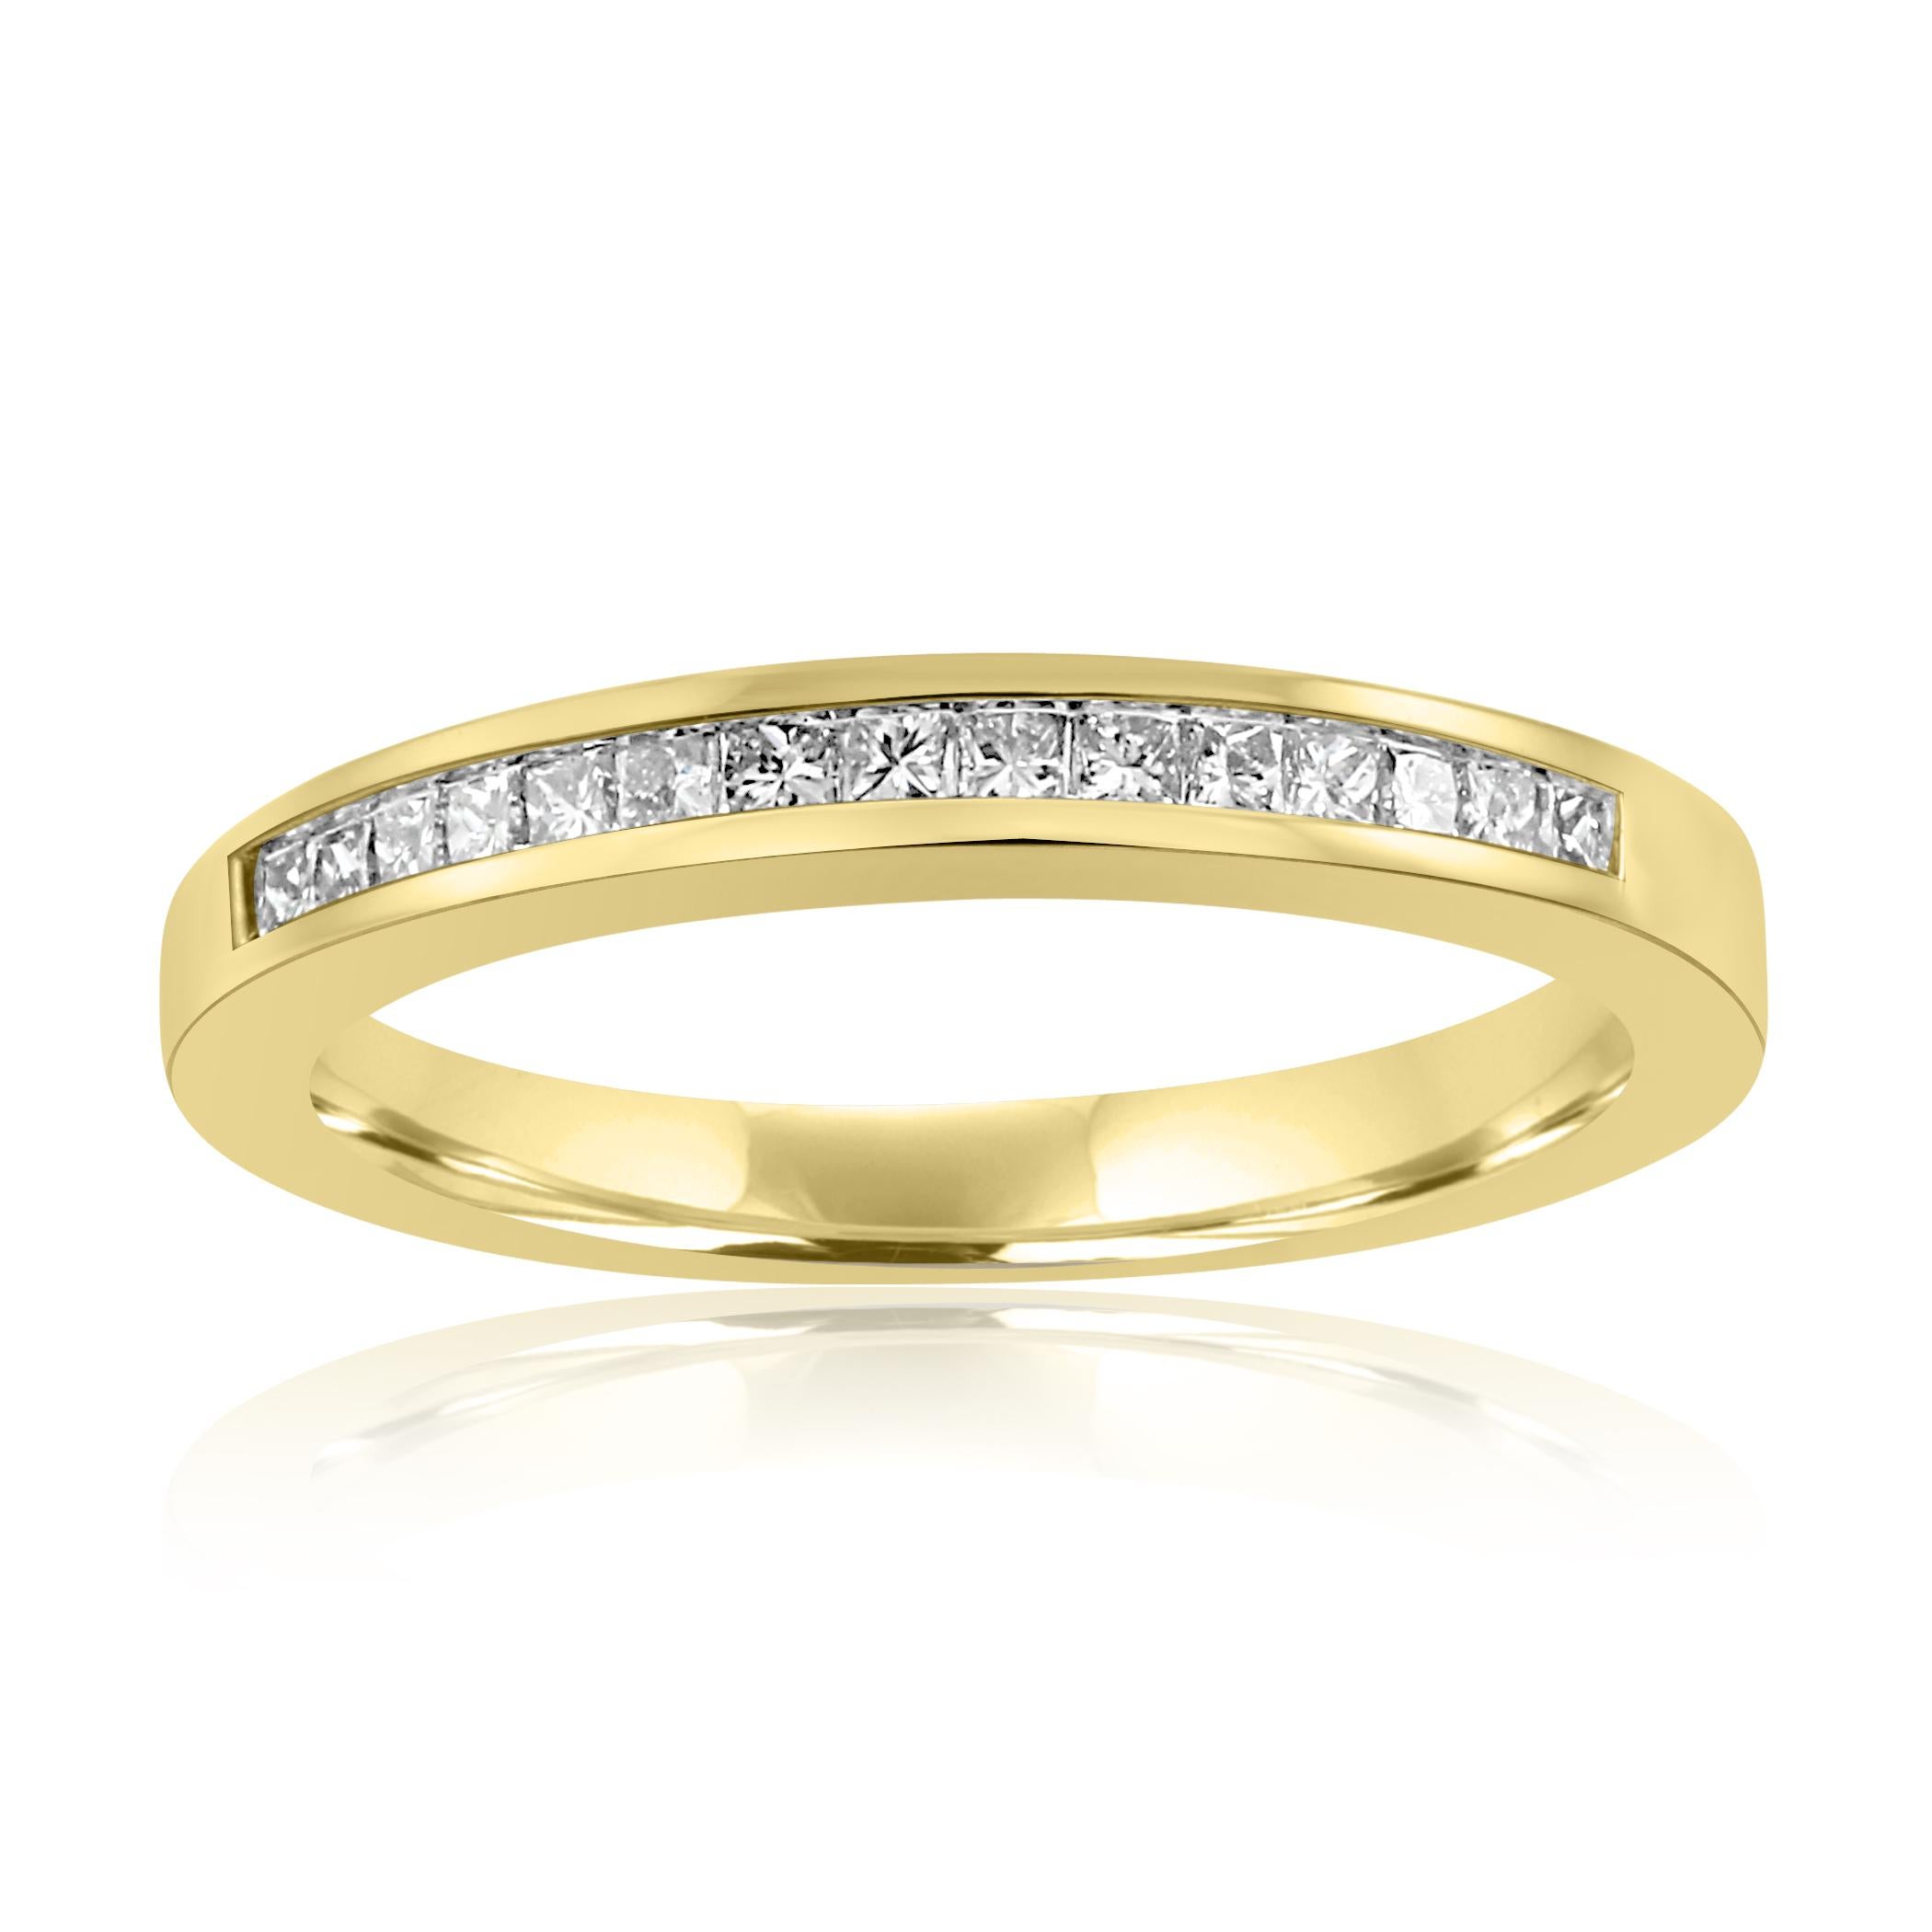 15 White G-H Color VS-SI Clarity Princess Cut Diamond 0.33 Carat Set in Classic yet Chic always in style channel set  Fashion Cocktail Wedding Band 18K Yellow Gold Ring.

Style available in different price ranges. Prices are based on your selection